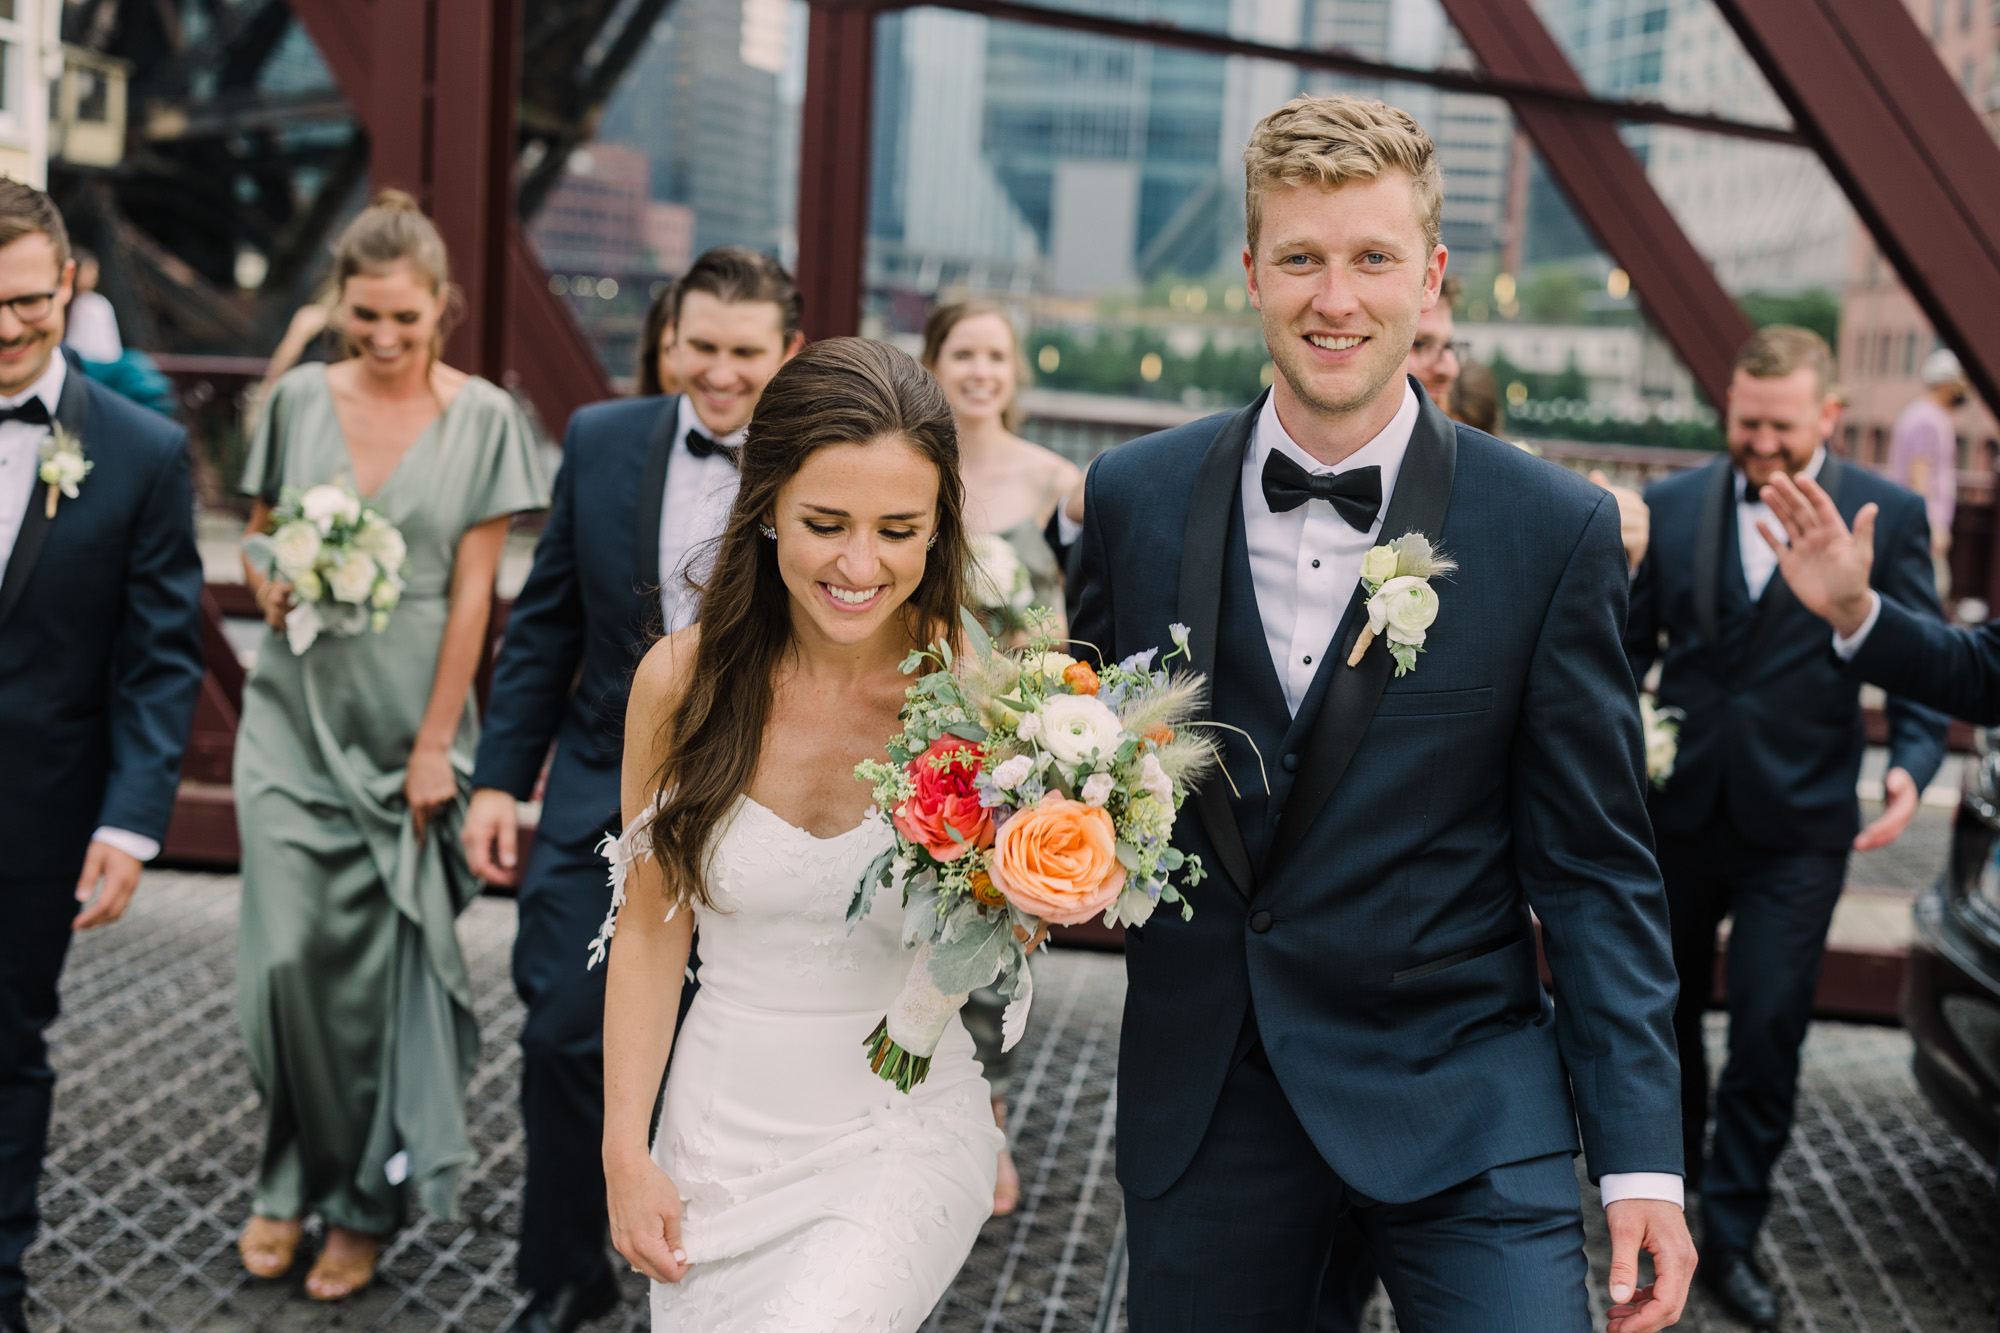 Wedding party pose on the Kinzie Street Bridge in Chicago's West Loop for a portrait.